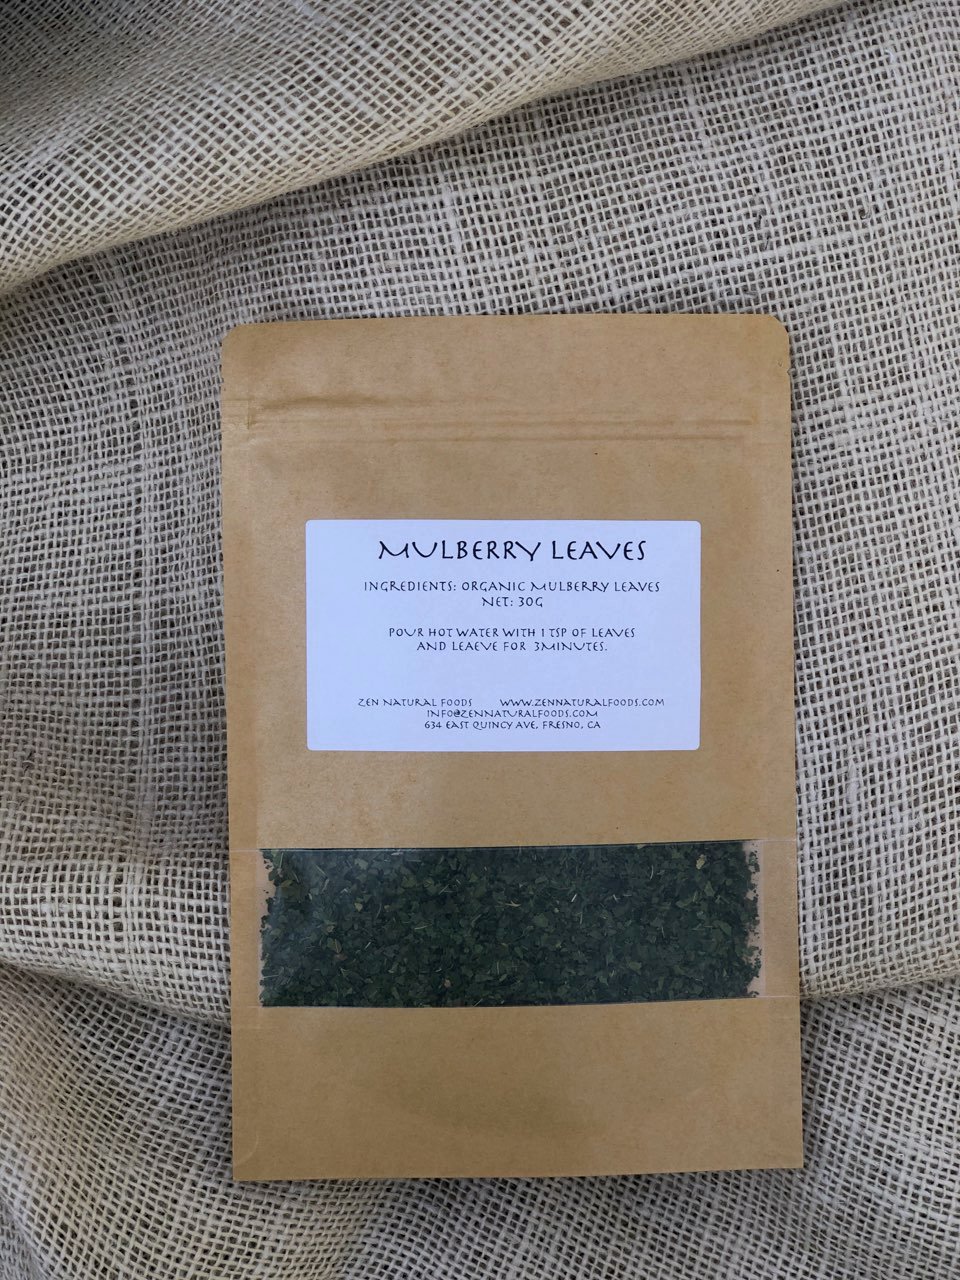 Image of Mulberry Tea